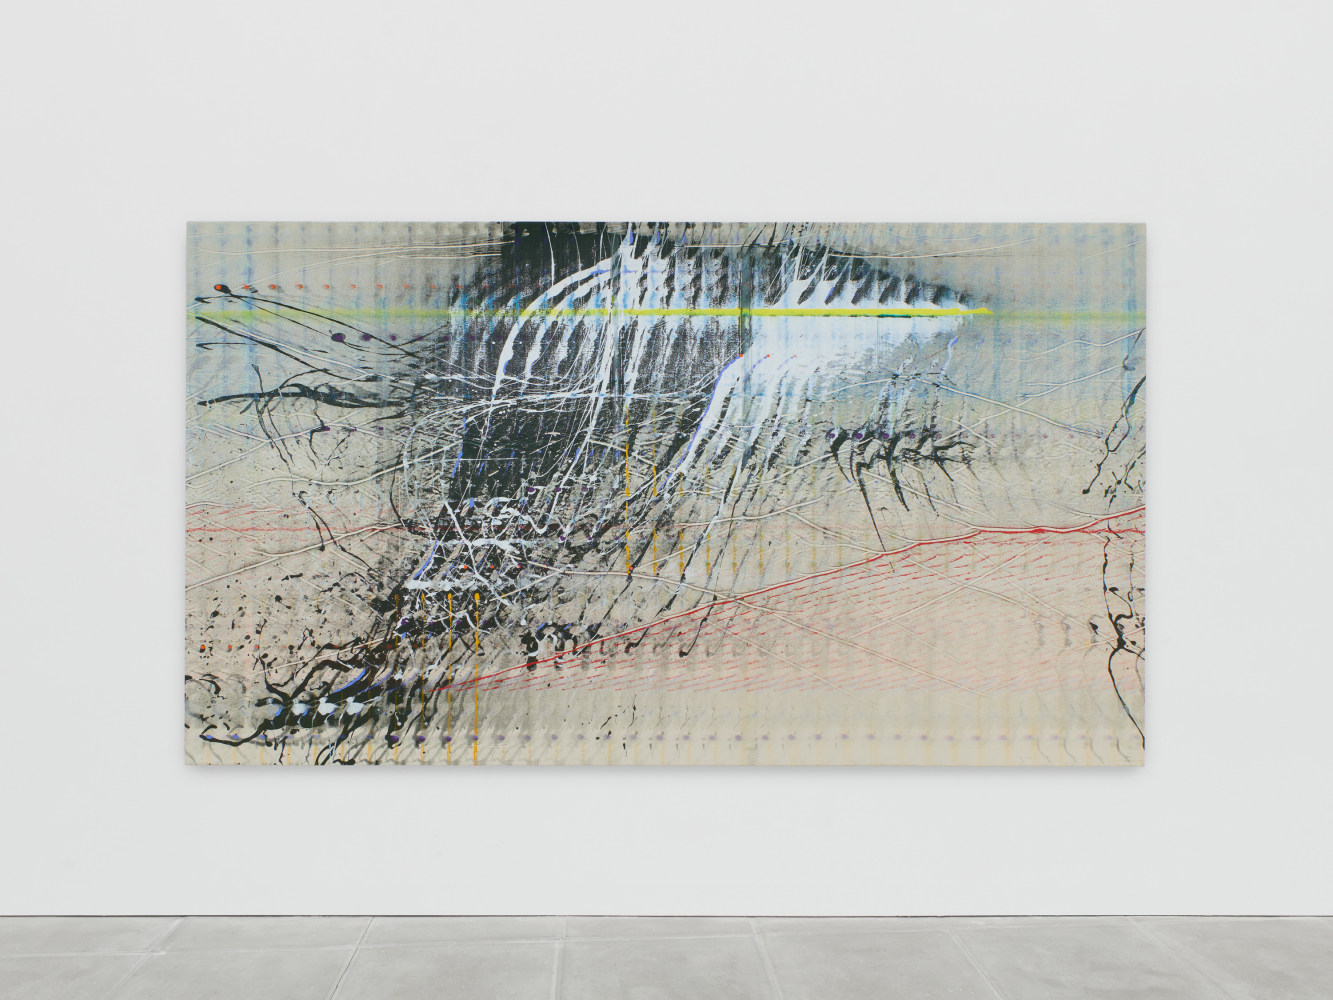 Emily Kraus
Agon, 2024
Oil on canvas
66 7/8 x 118 1/8 inches
(170 x 300 cm)
&amp;copy; Emily Kraus; Courtesy of the artist, The Sunday Painter, London, and Luhring Augustine, New York. Photo: Ollie Hammick.